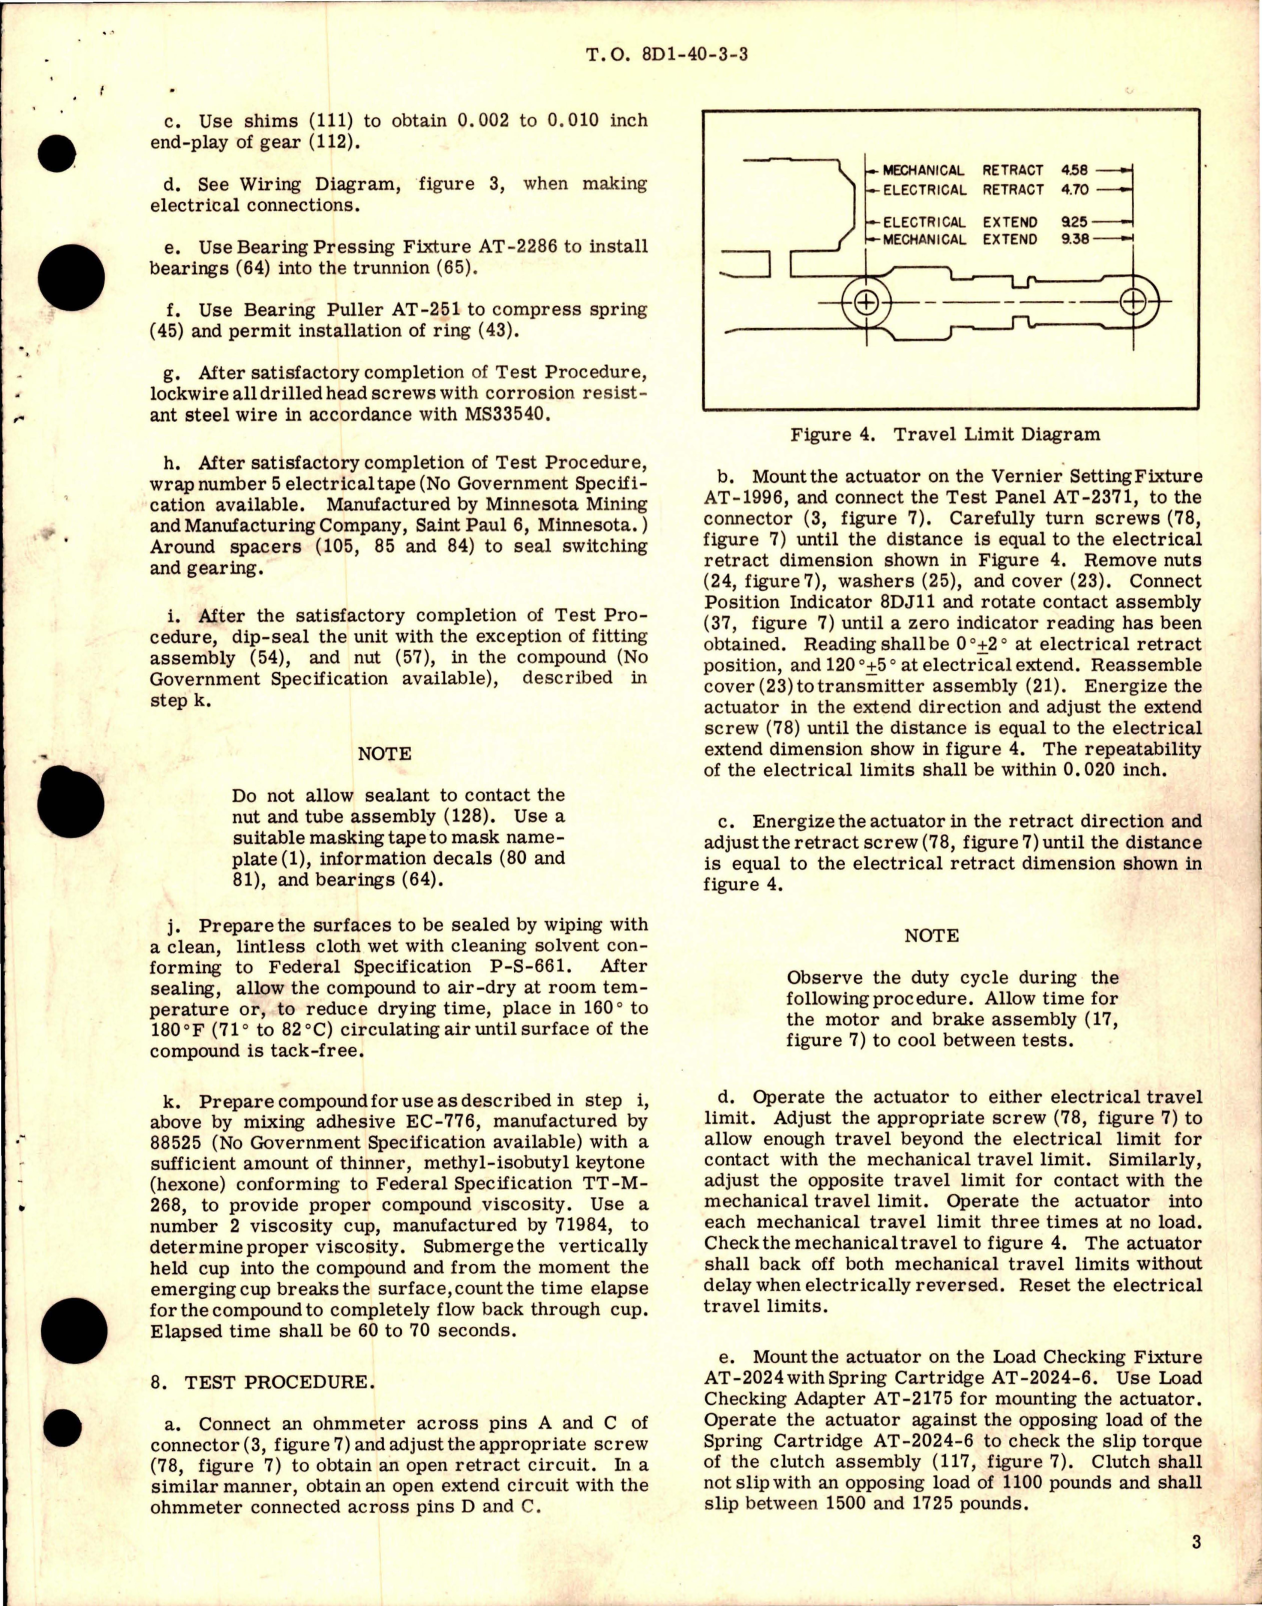 Sample page 5 from AirCorps Library document: Overhaul with Parts Breakdown for Electro-Mechanical Linear Actuator - Models L16-8 and L16-8-1